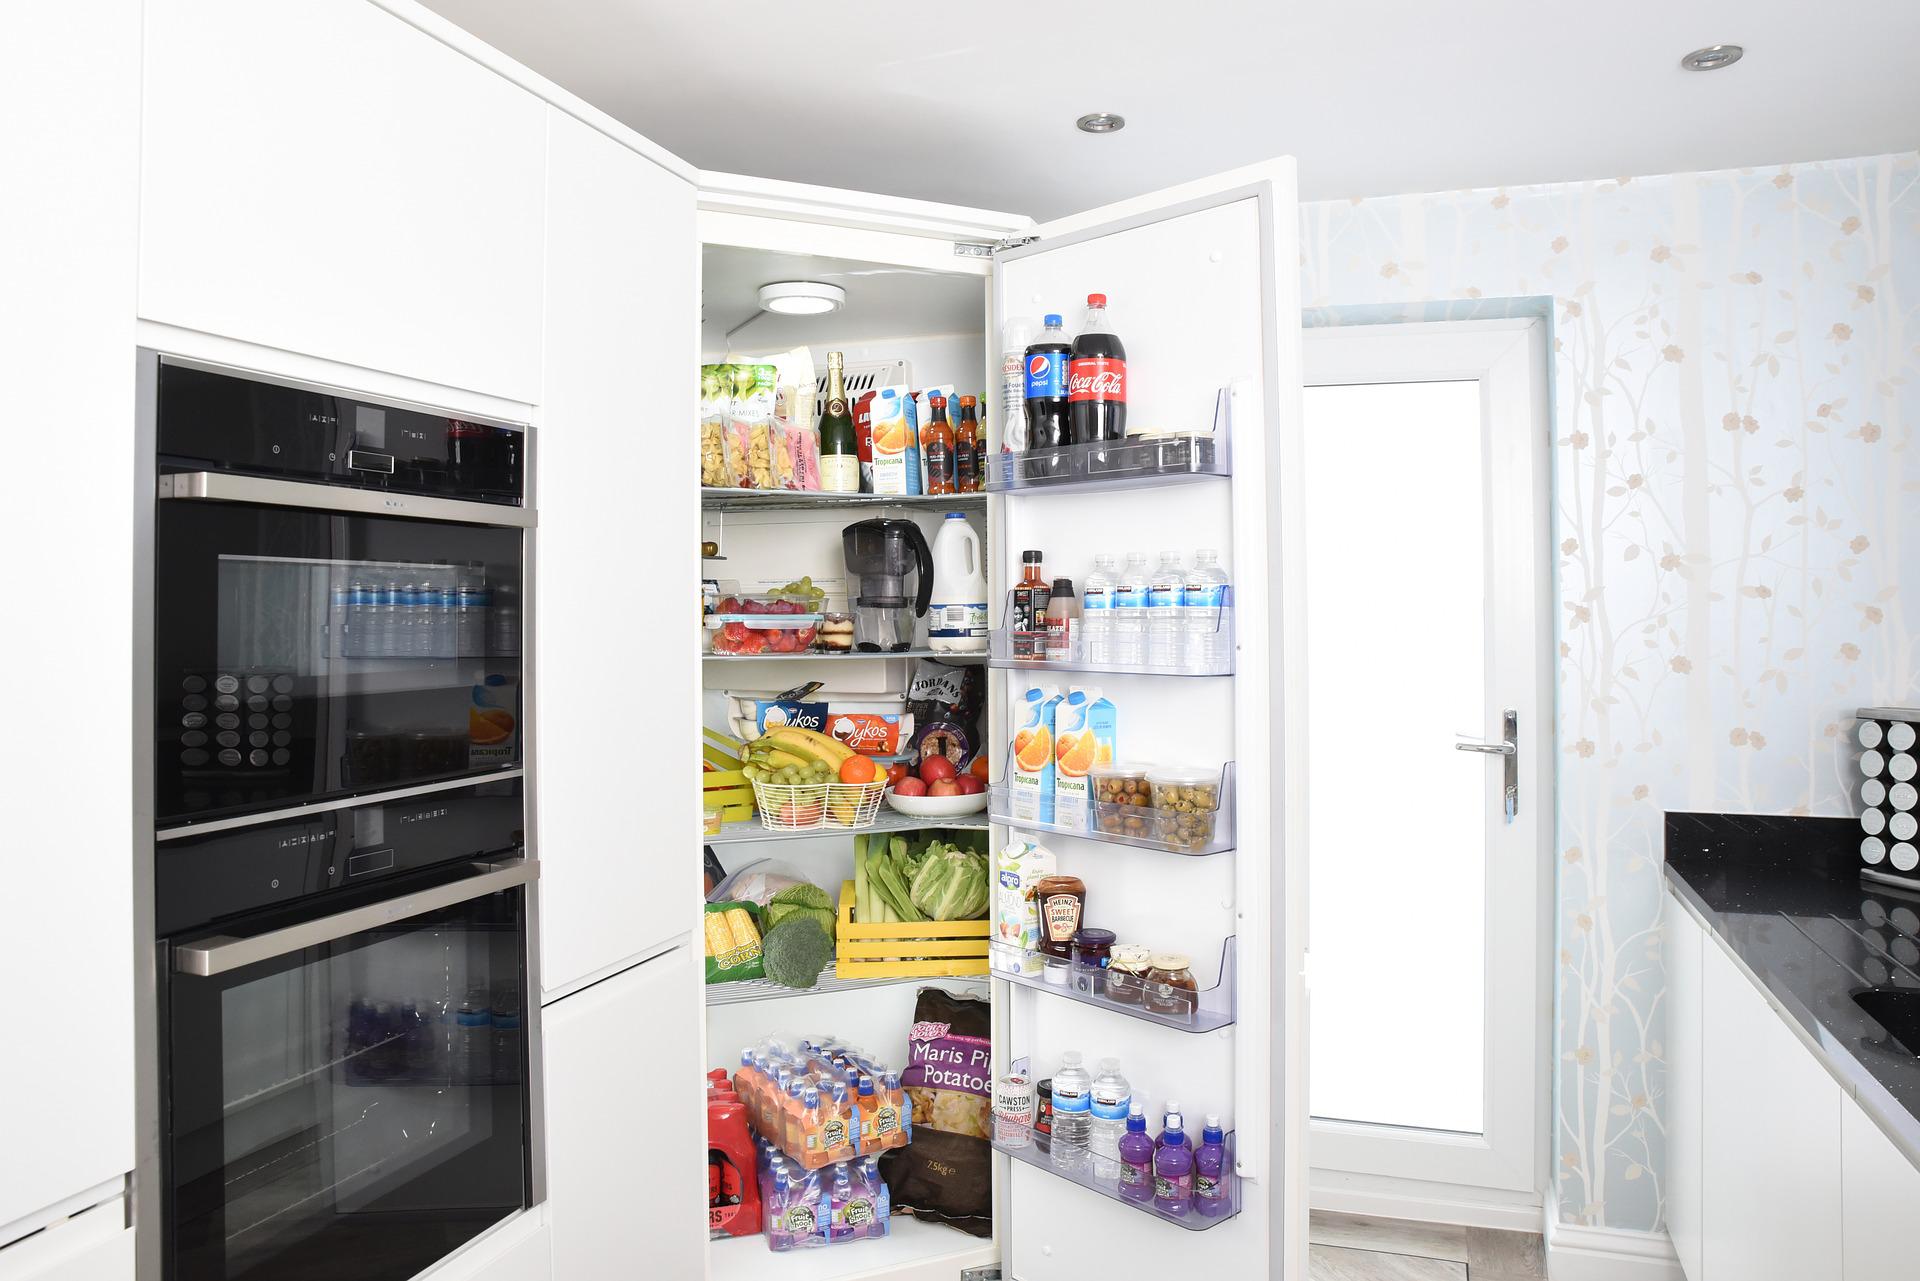 fridge g9c3f0b6b2 1920 French Store Uses Honeywell Refrigerant as Grocers Strive for Low-Emission Cooling